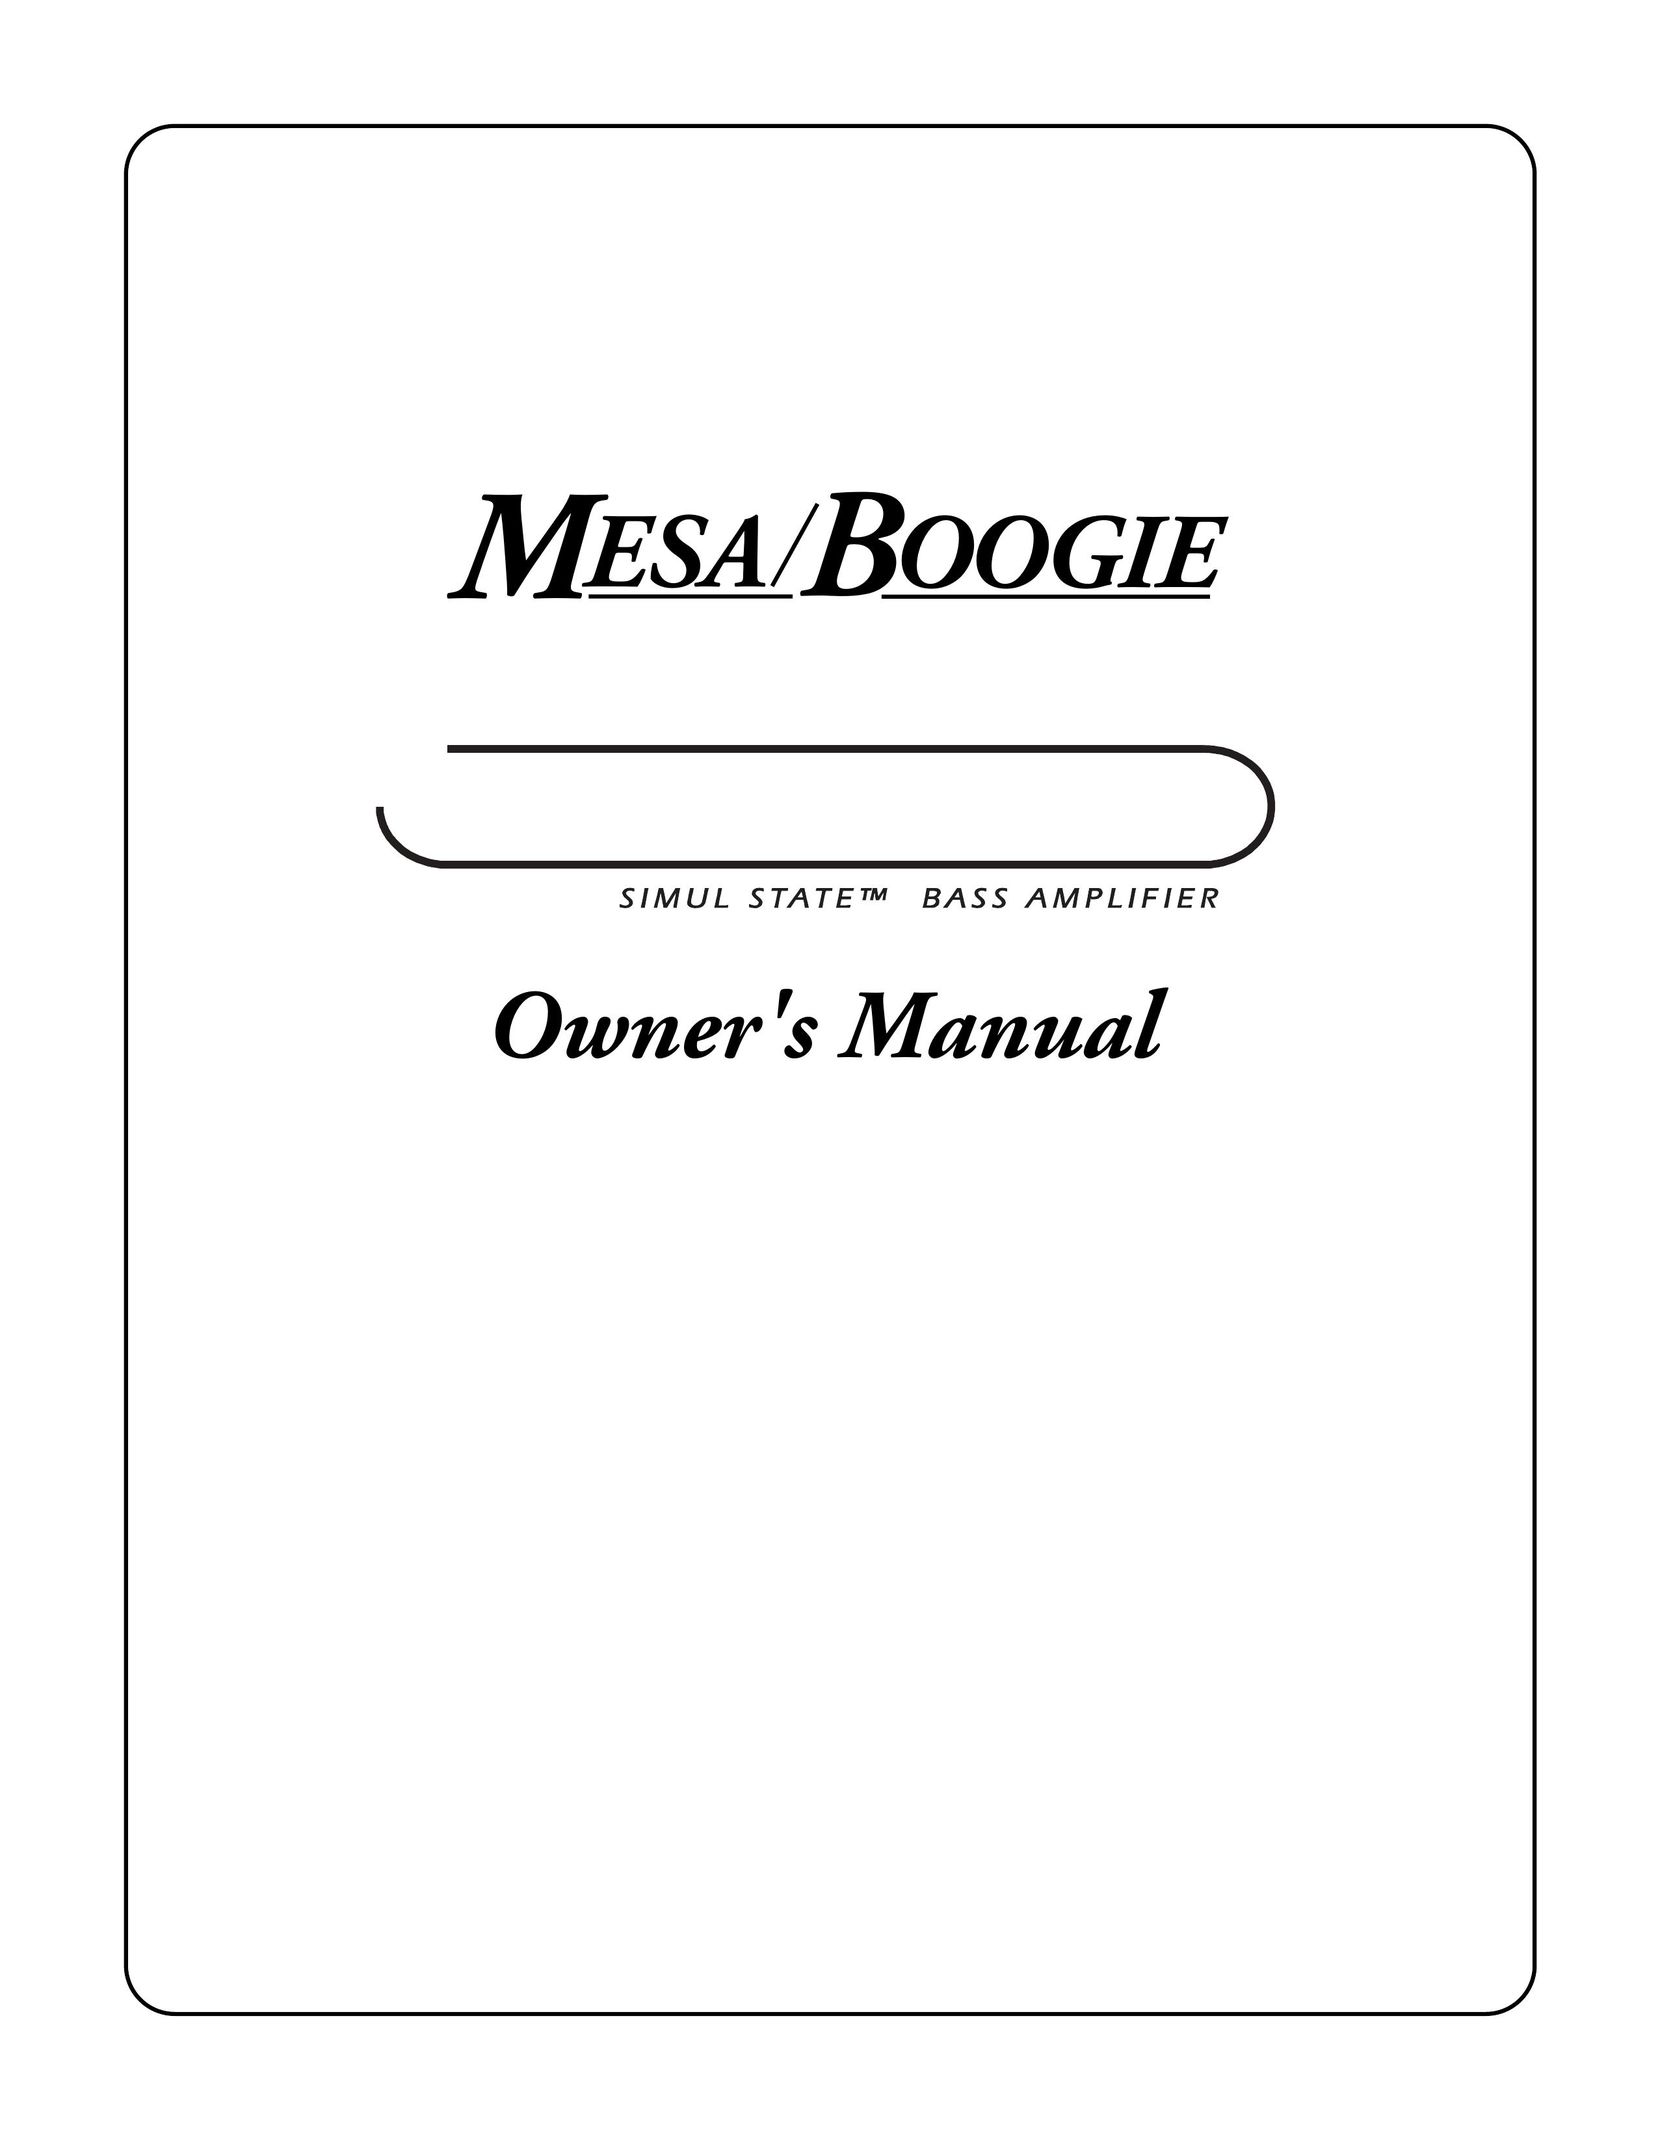 Mesa/Boogie M-pulse Simul State Bass Amplifier Stereo Amplifier User Manual